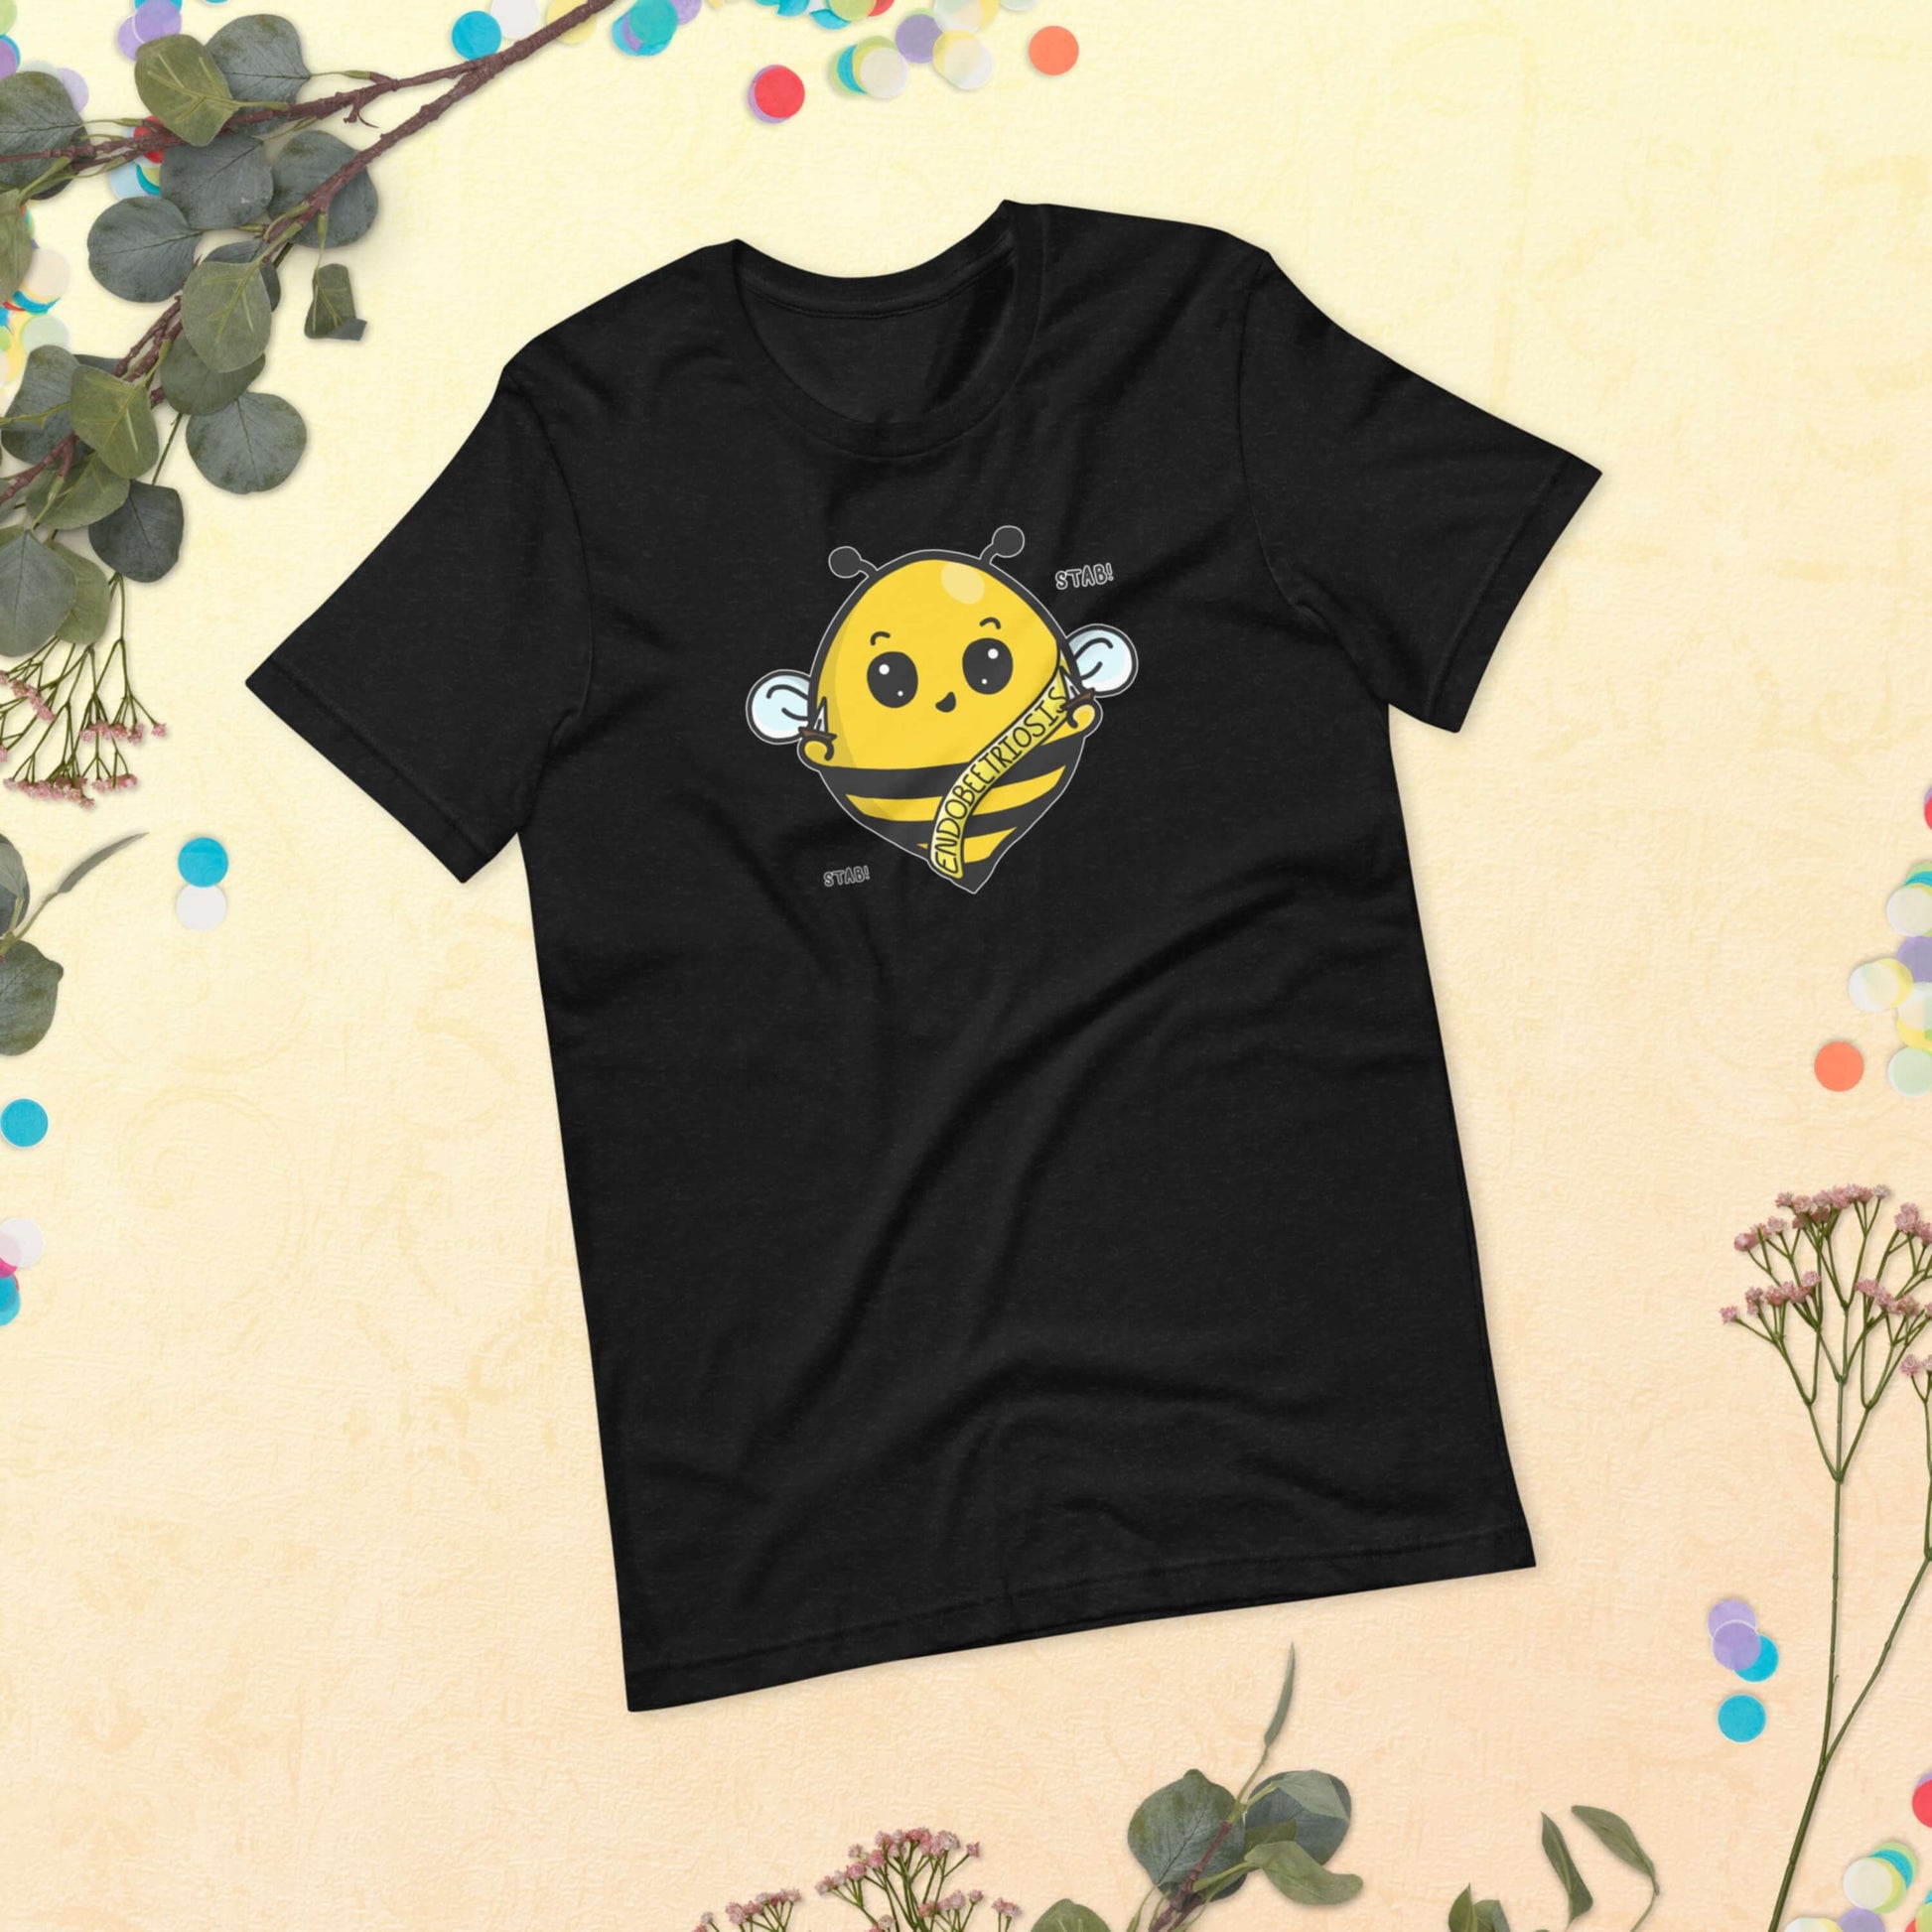 The Endobeetriosis Tee - Endometriosis laying on a pastel yellow background with multicoloured confetti and plant foliage. The black short sleeve tshirt features a smiling happy bumblebee holding small daggers with a yellow banner reading 'endobeetriosis' with the words 'stab! stab!' surrounding the buzzy bee. The hand drawn design is raising awareness for endometriosis.